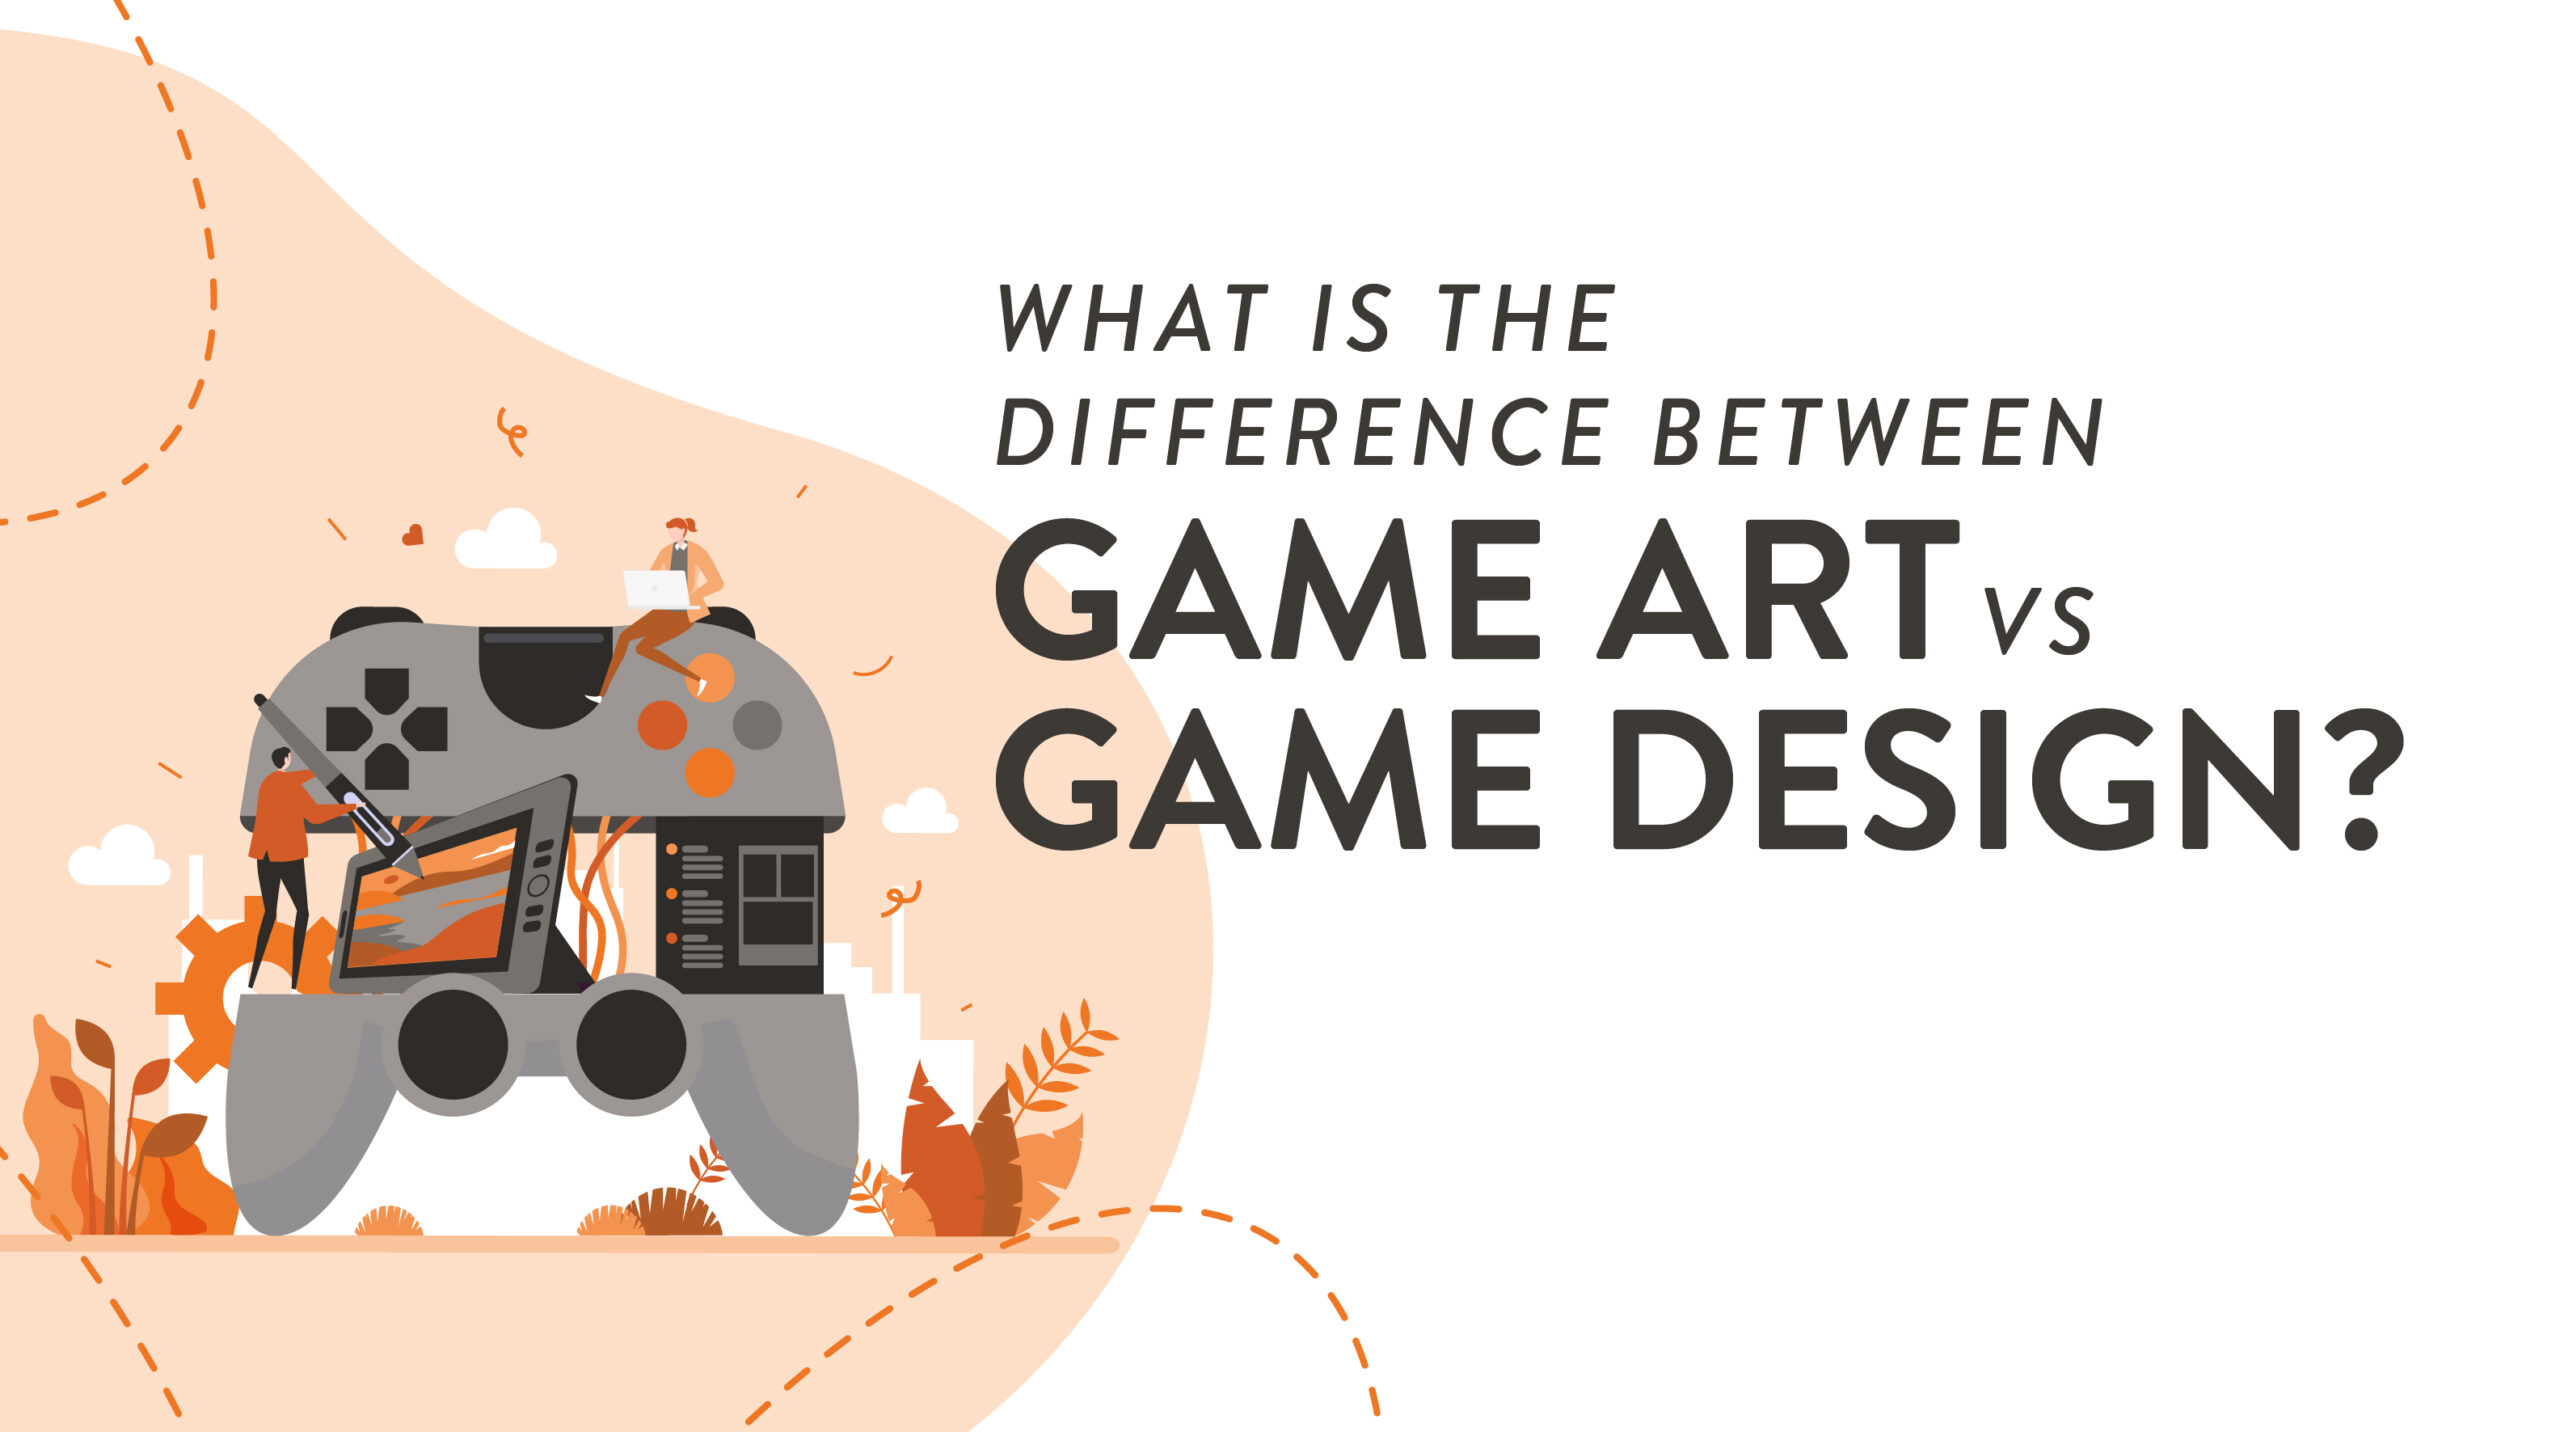 What is the difference between game art and game design